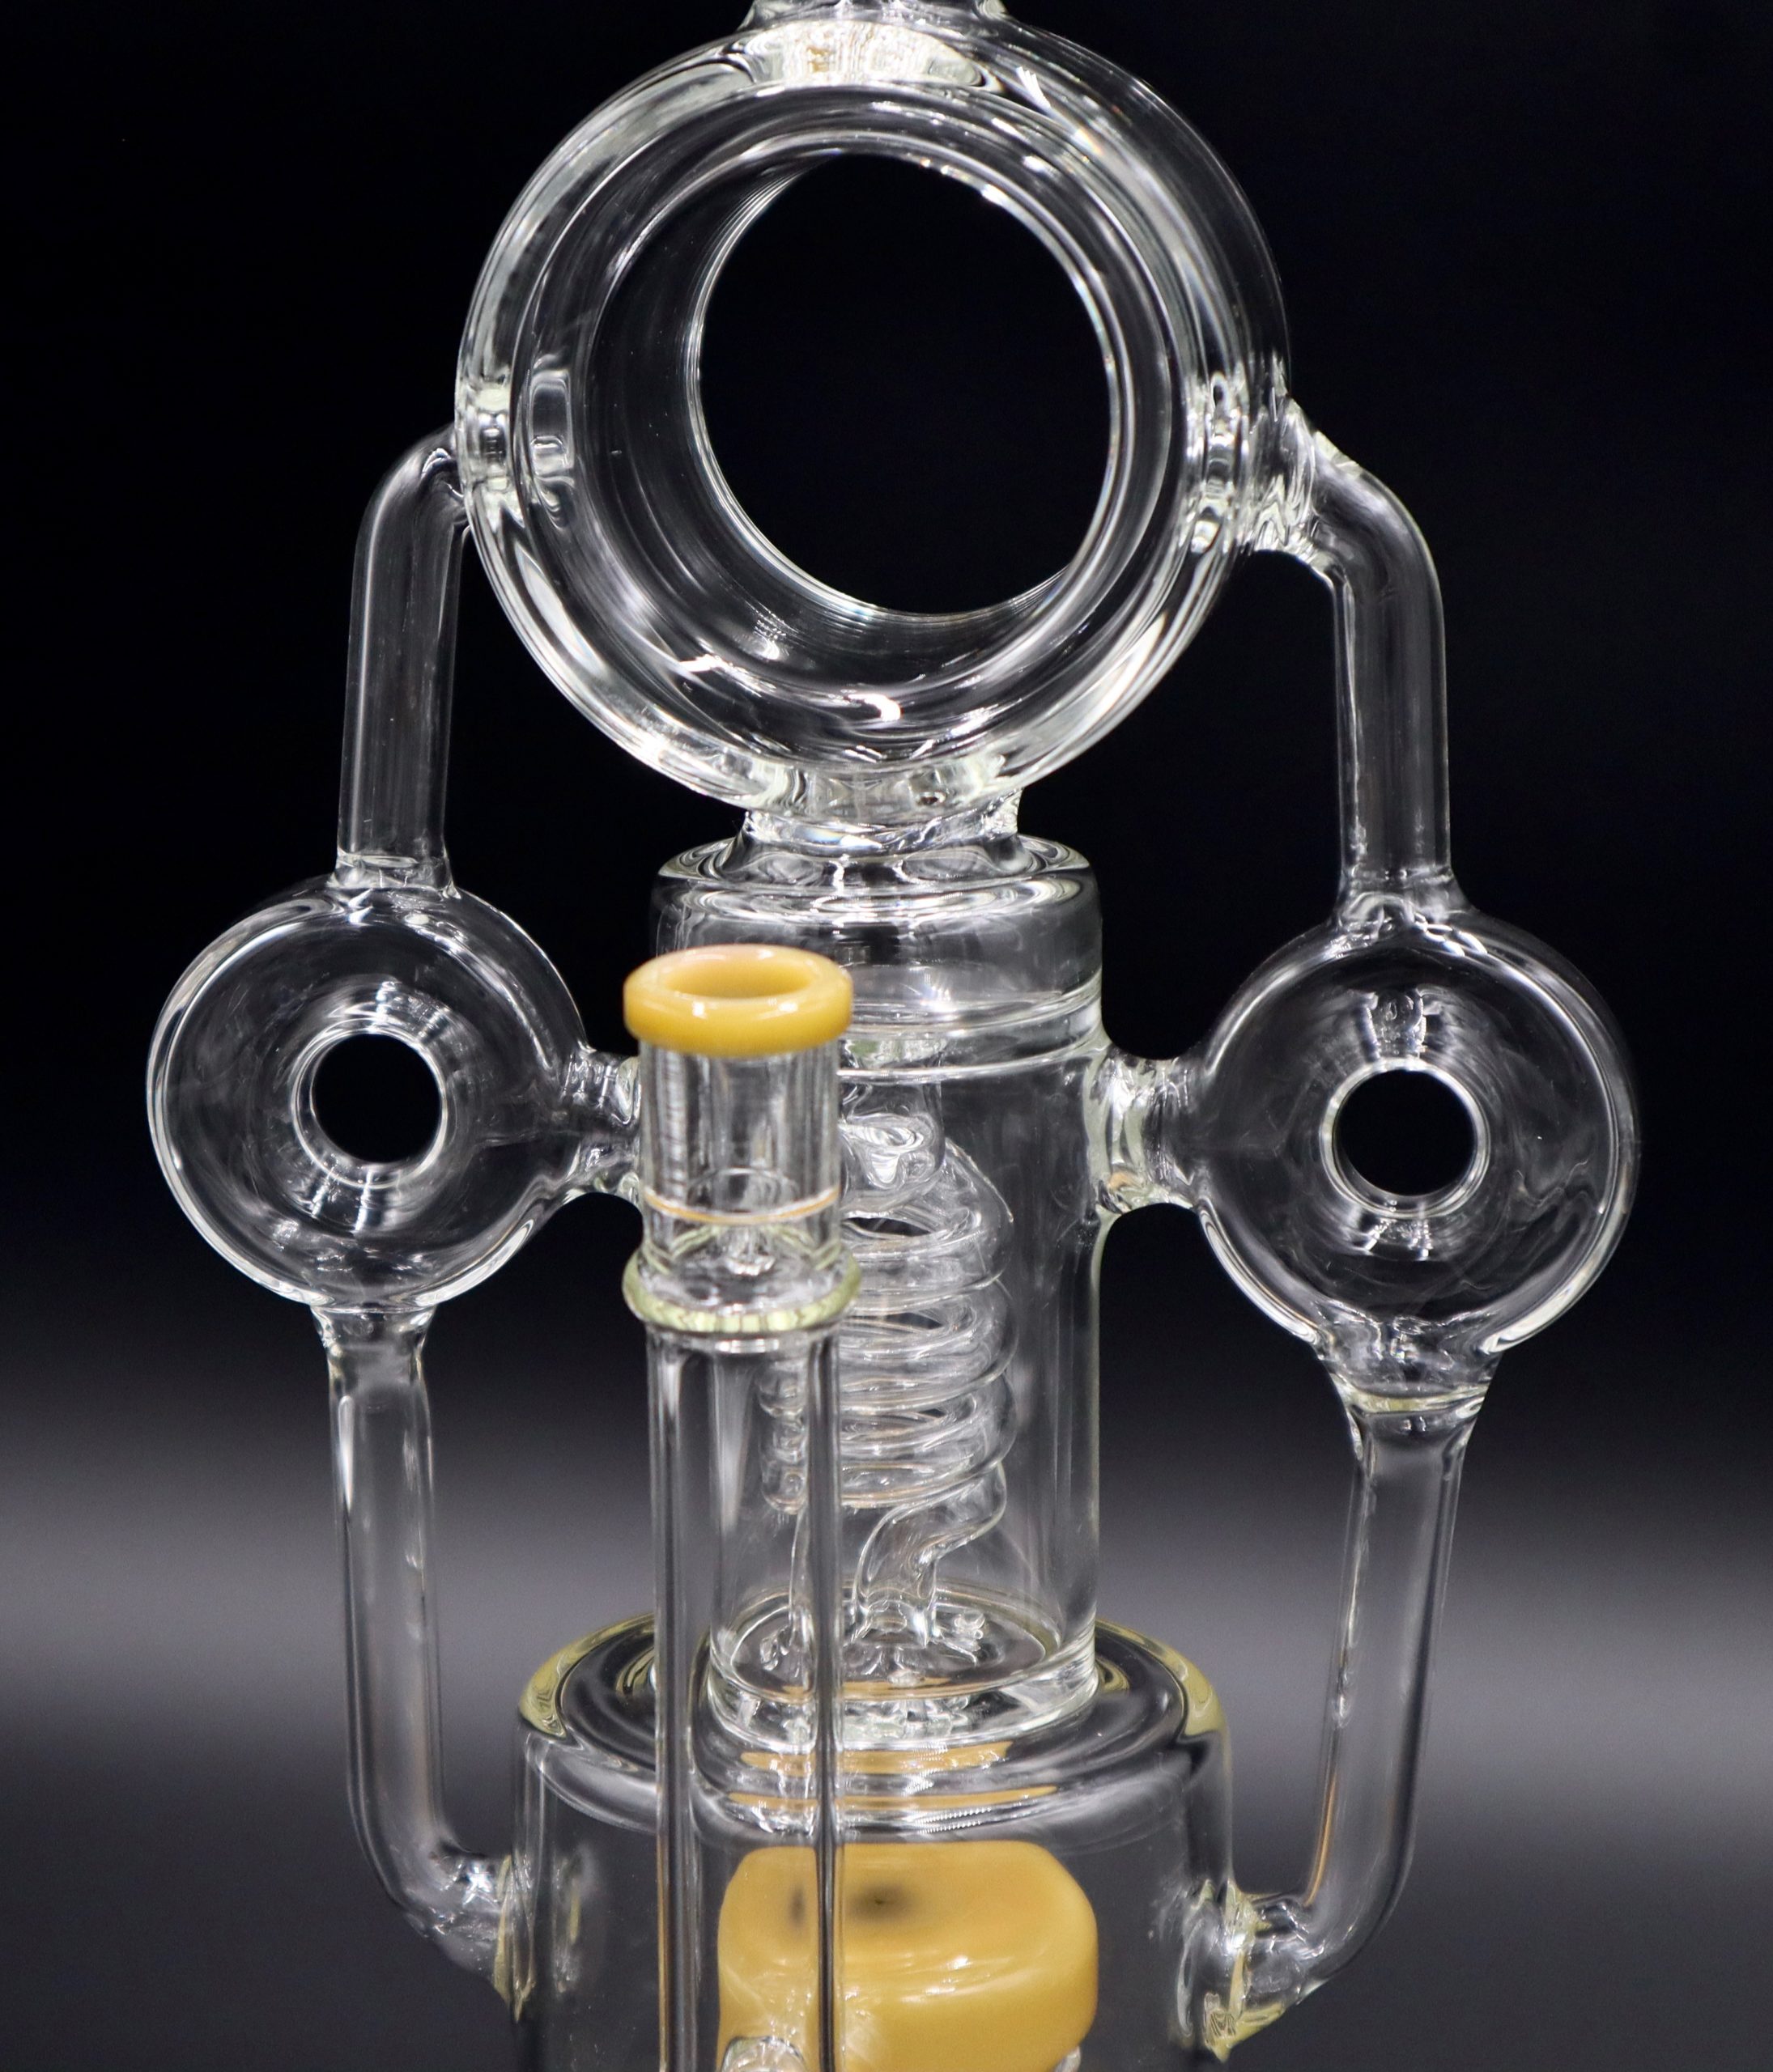 https://topfivewholesale.com/wp-content/uploads/2022/10/GL089-20%E2%80%B3-Water-Pipe-Swiss-Neck-Twisted-Percolator-Double-Barrel-3-Ring-Yellow-middle.jpg